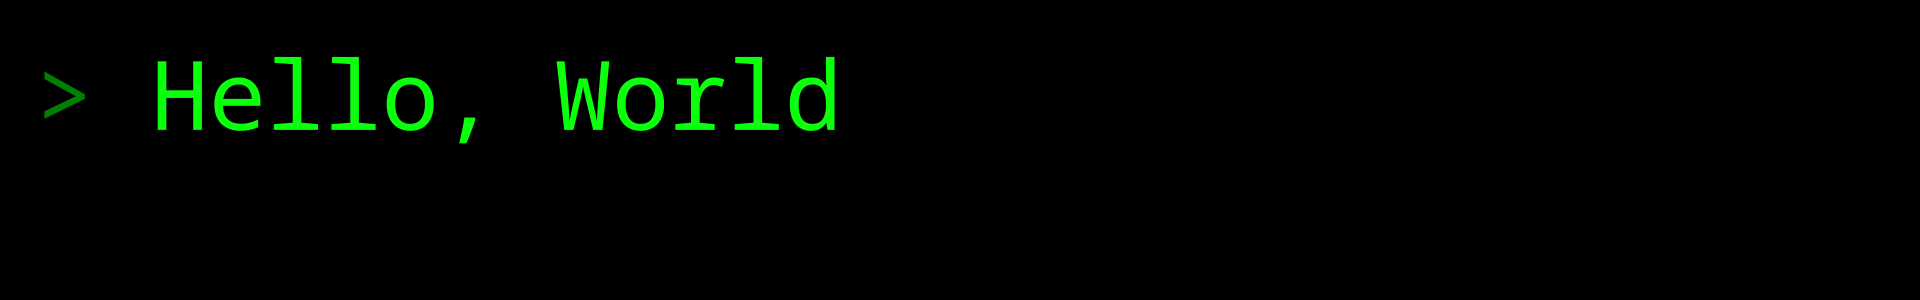 "Hello, World" in green on a black background